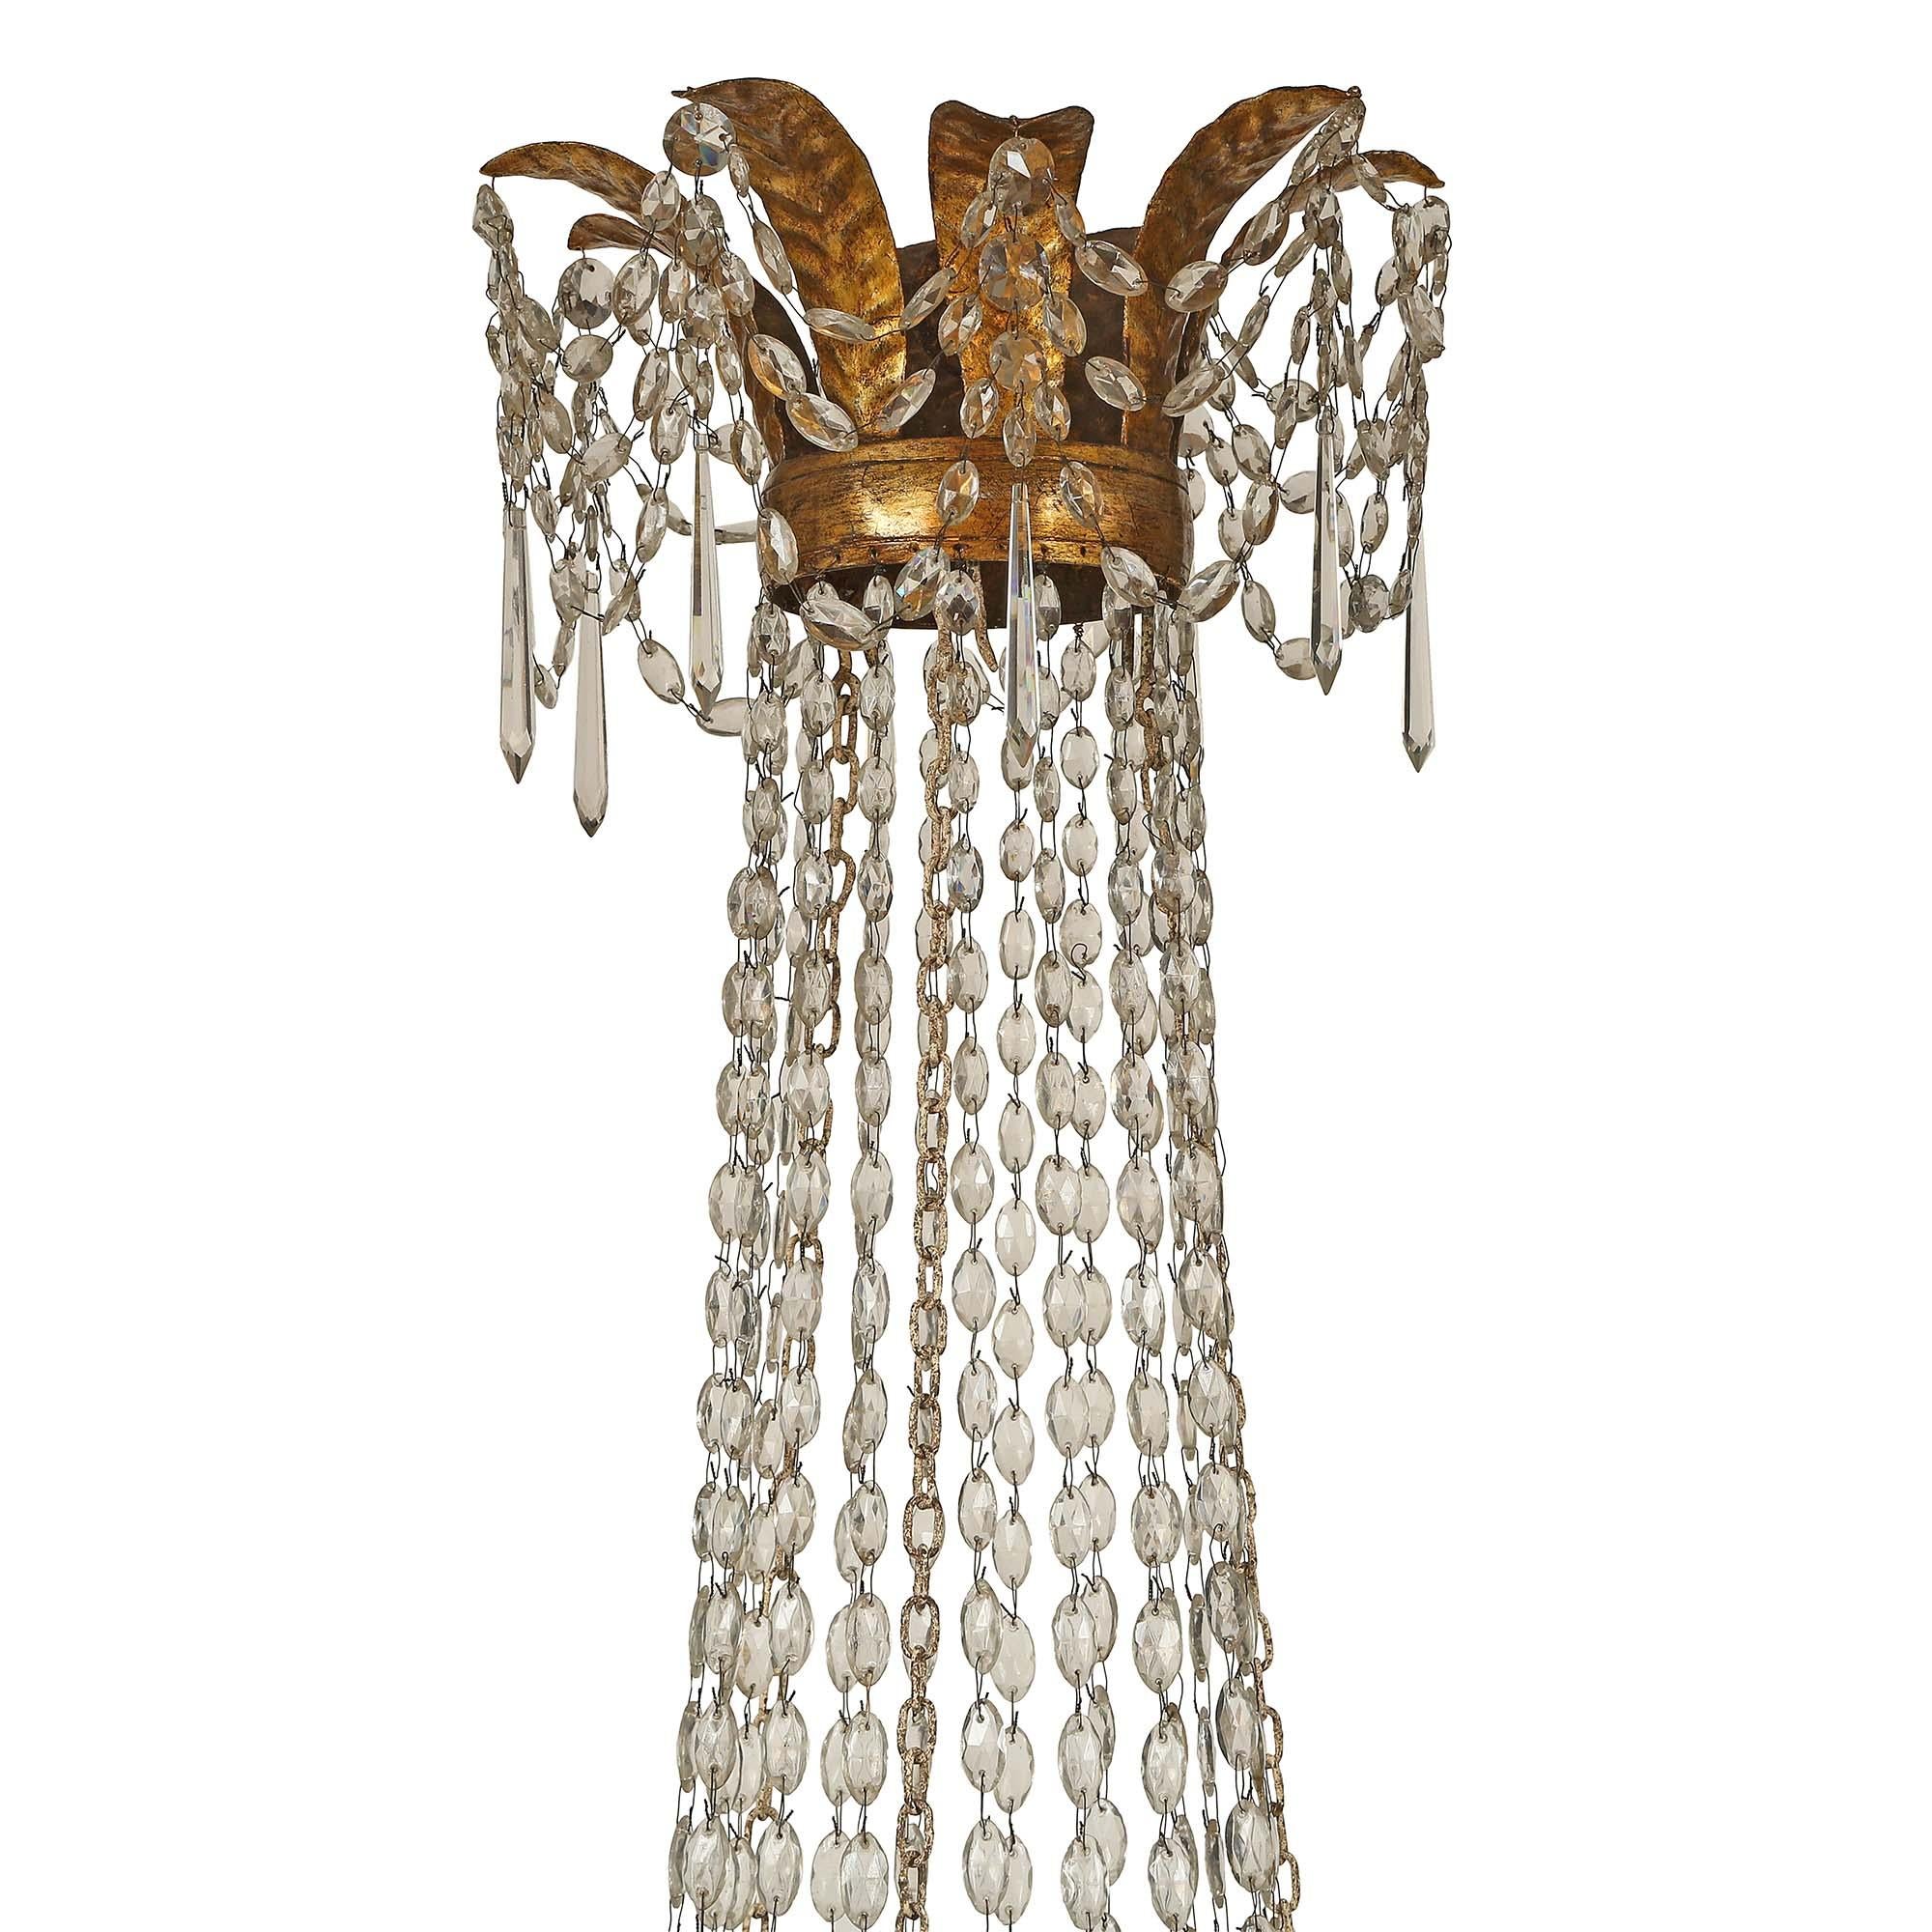 A most unique and extremely decorative Italian 18th century gilt metal, gilt wood and patinated wood sixteen light chandelier. The chandelier is centered by a bottom gilt metal band with cut crystal pendants. Leading up finely carved giltwood and